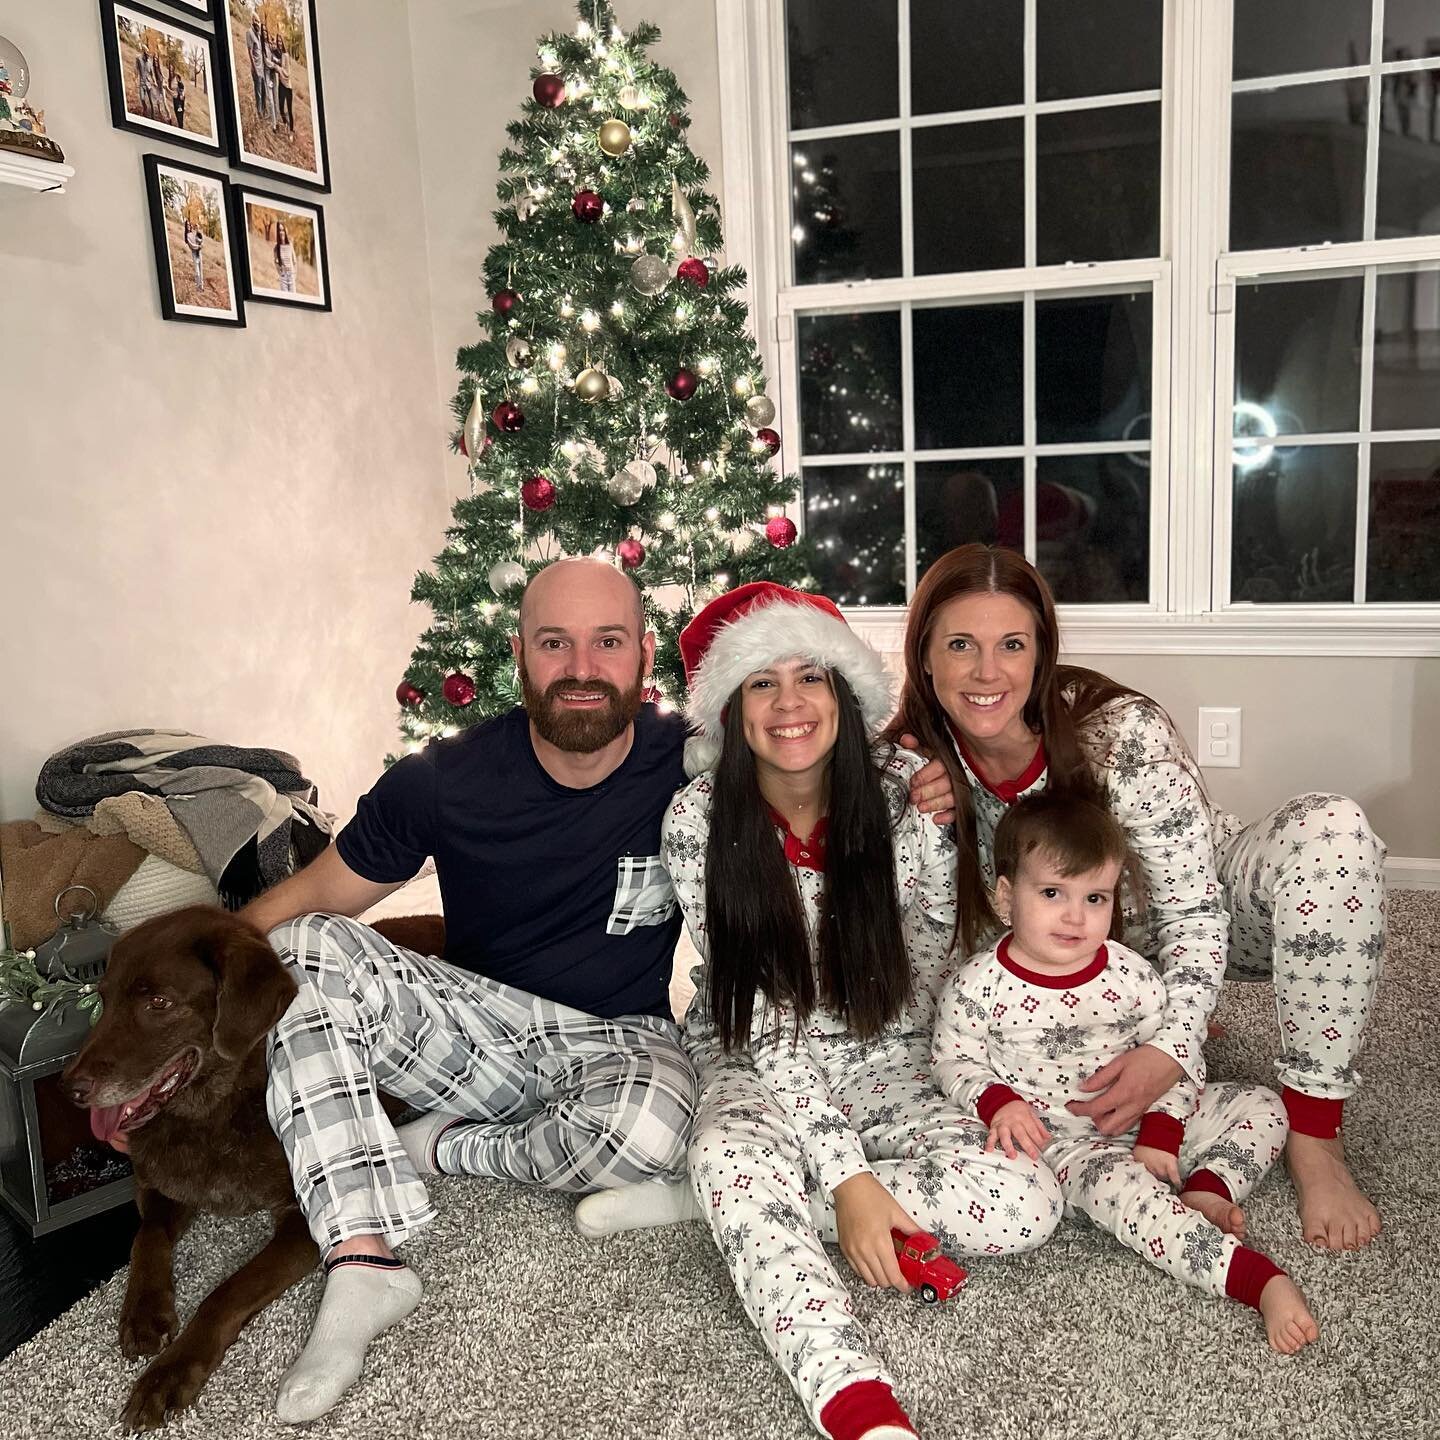 Merry Christmas from the Yentas family! 🎄🎅🏻